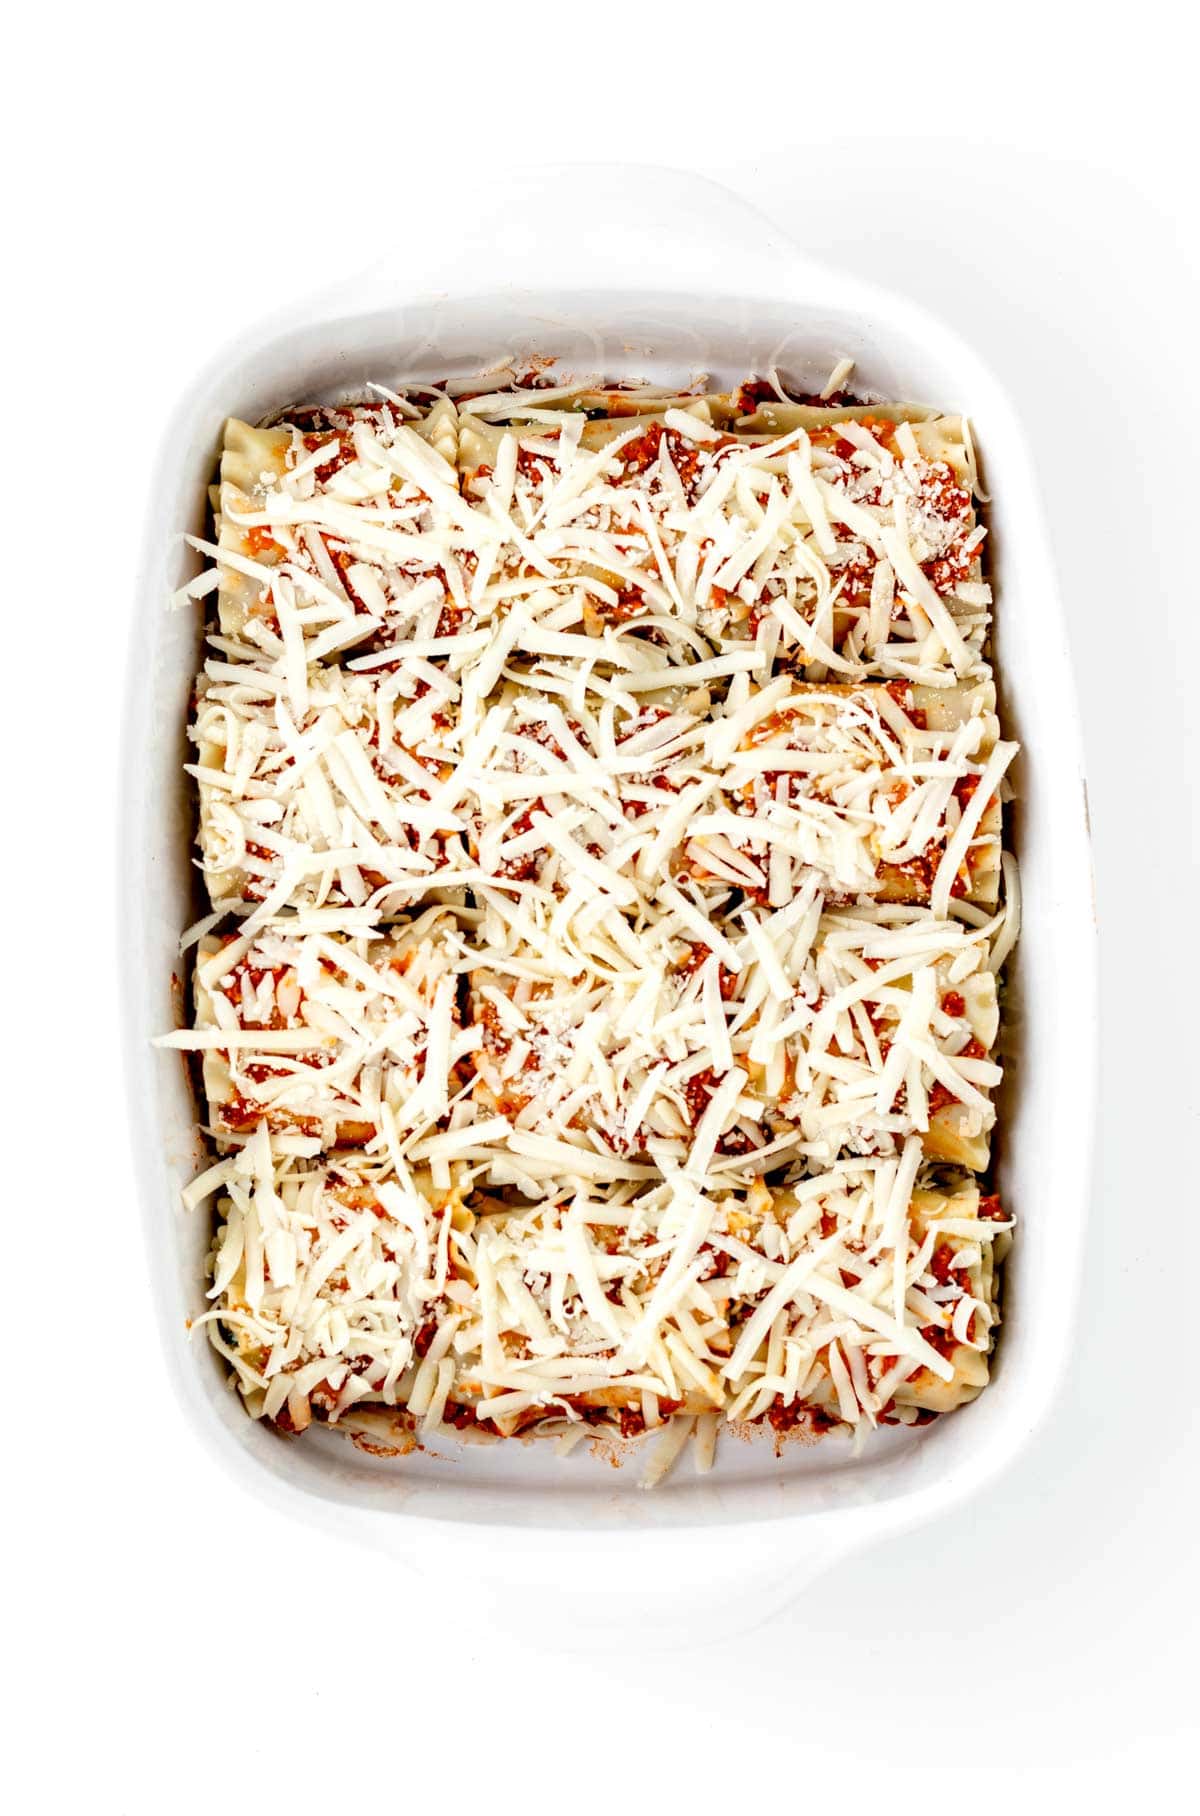 Hidden veggie lasagna roll ups covered in cheese in a baking dish, prior to baking.